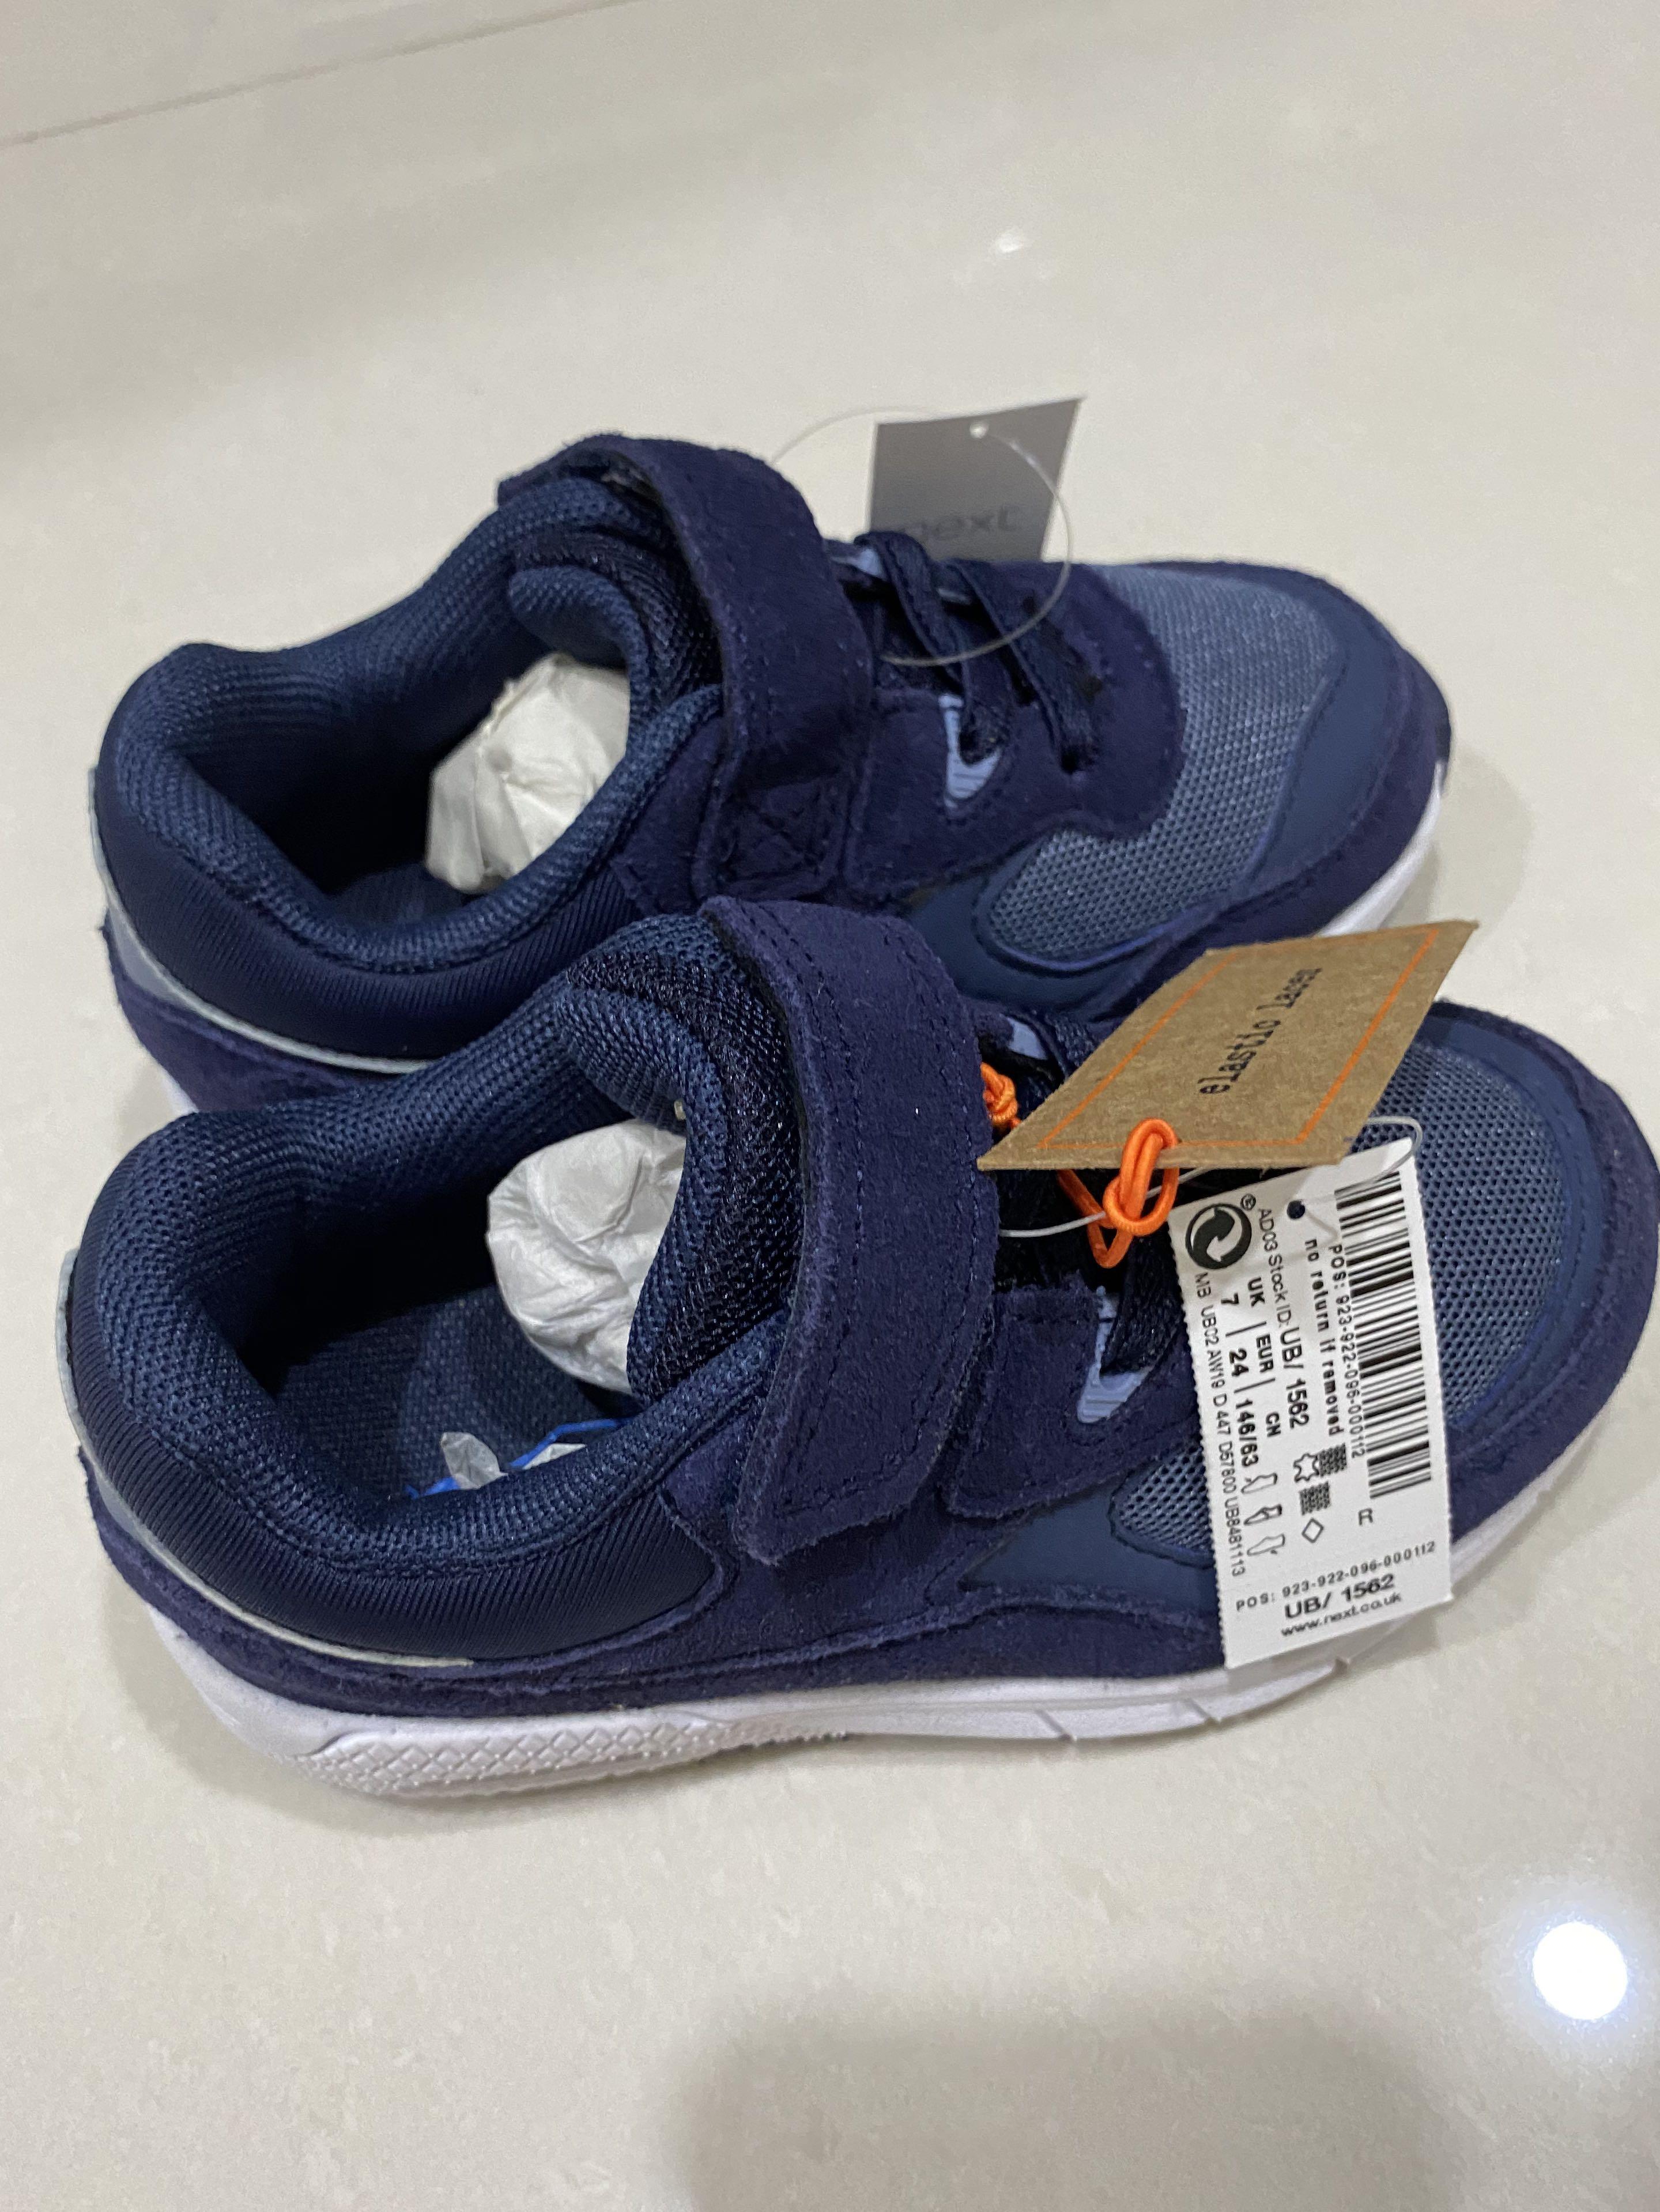 BN Next UK Blue Navy Sneakers Trainers 